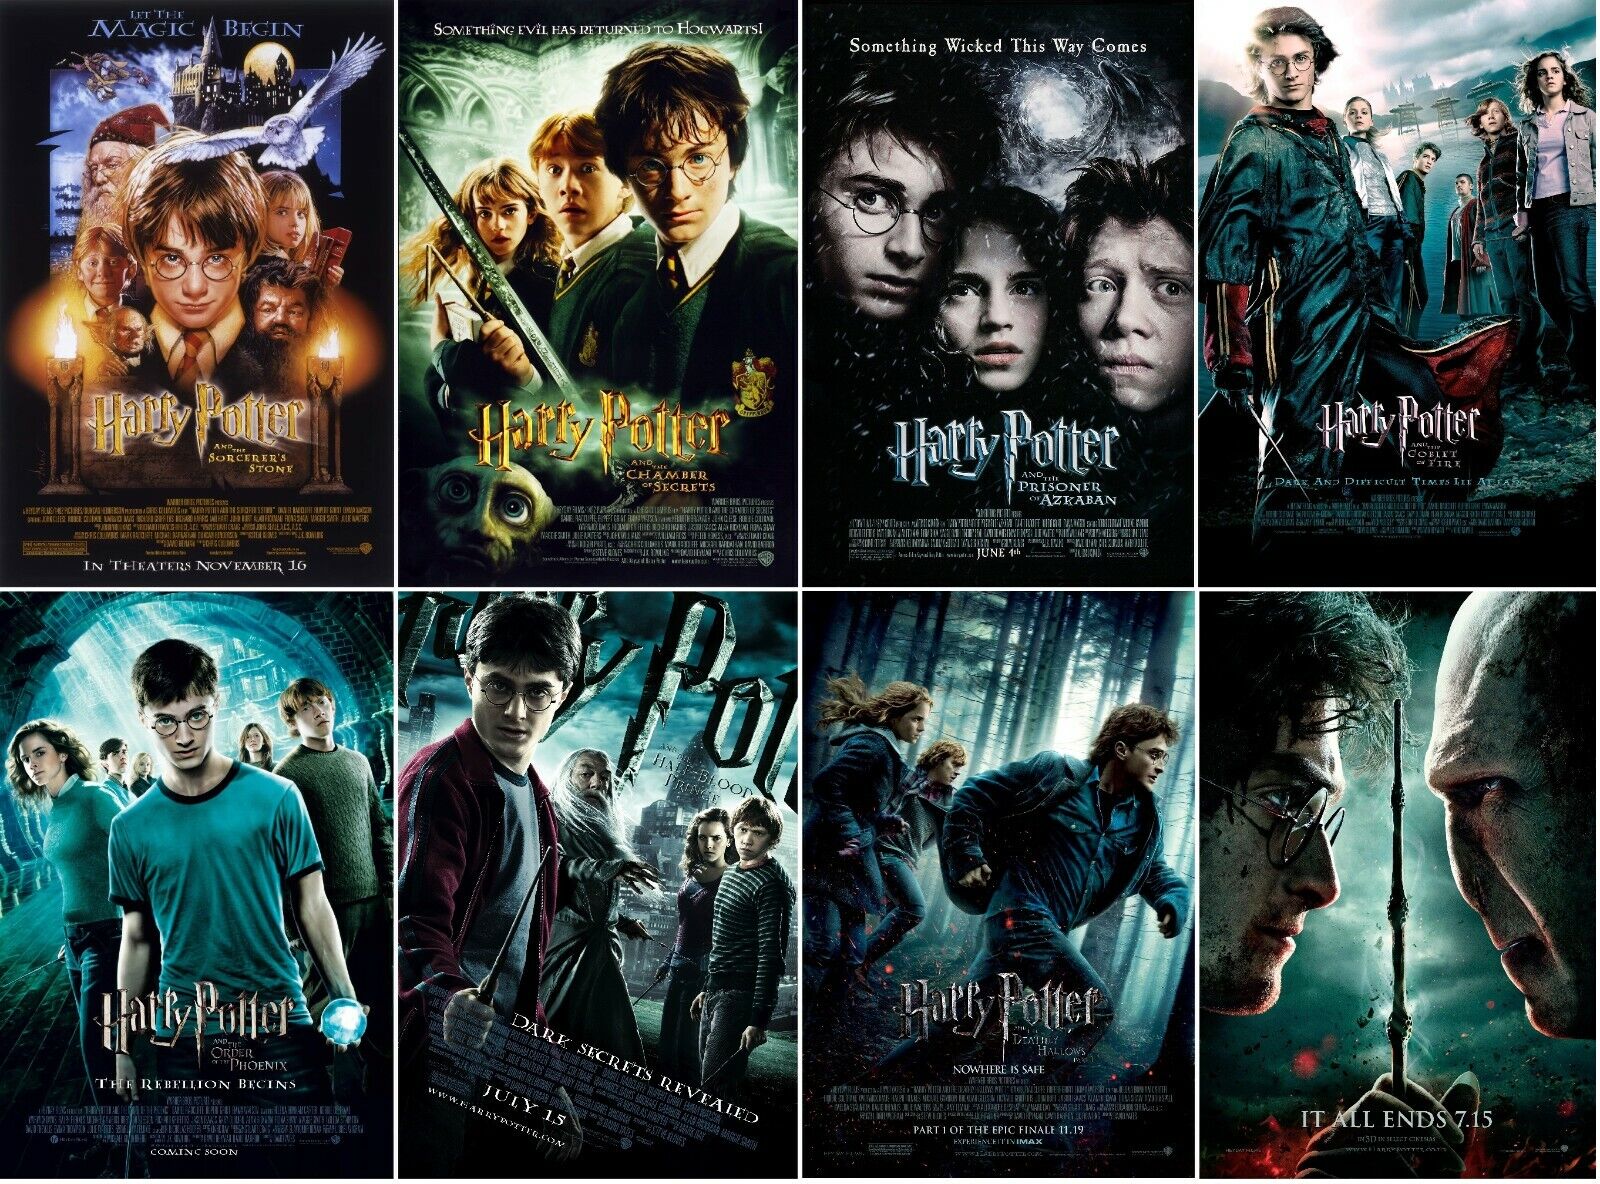 How long does it take to watch all of Harry Potter?